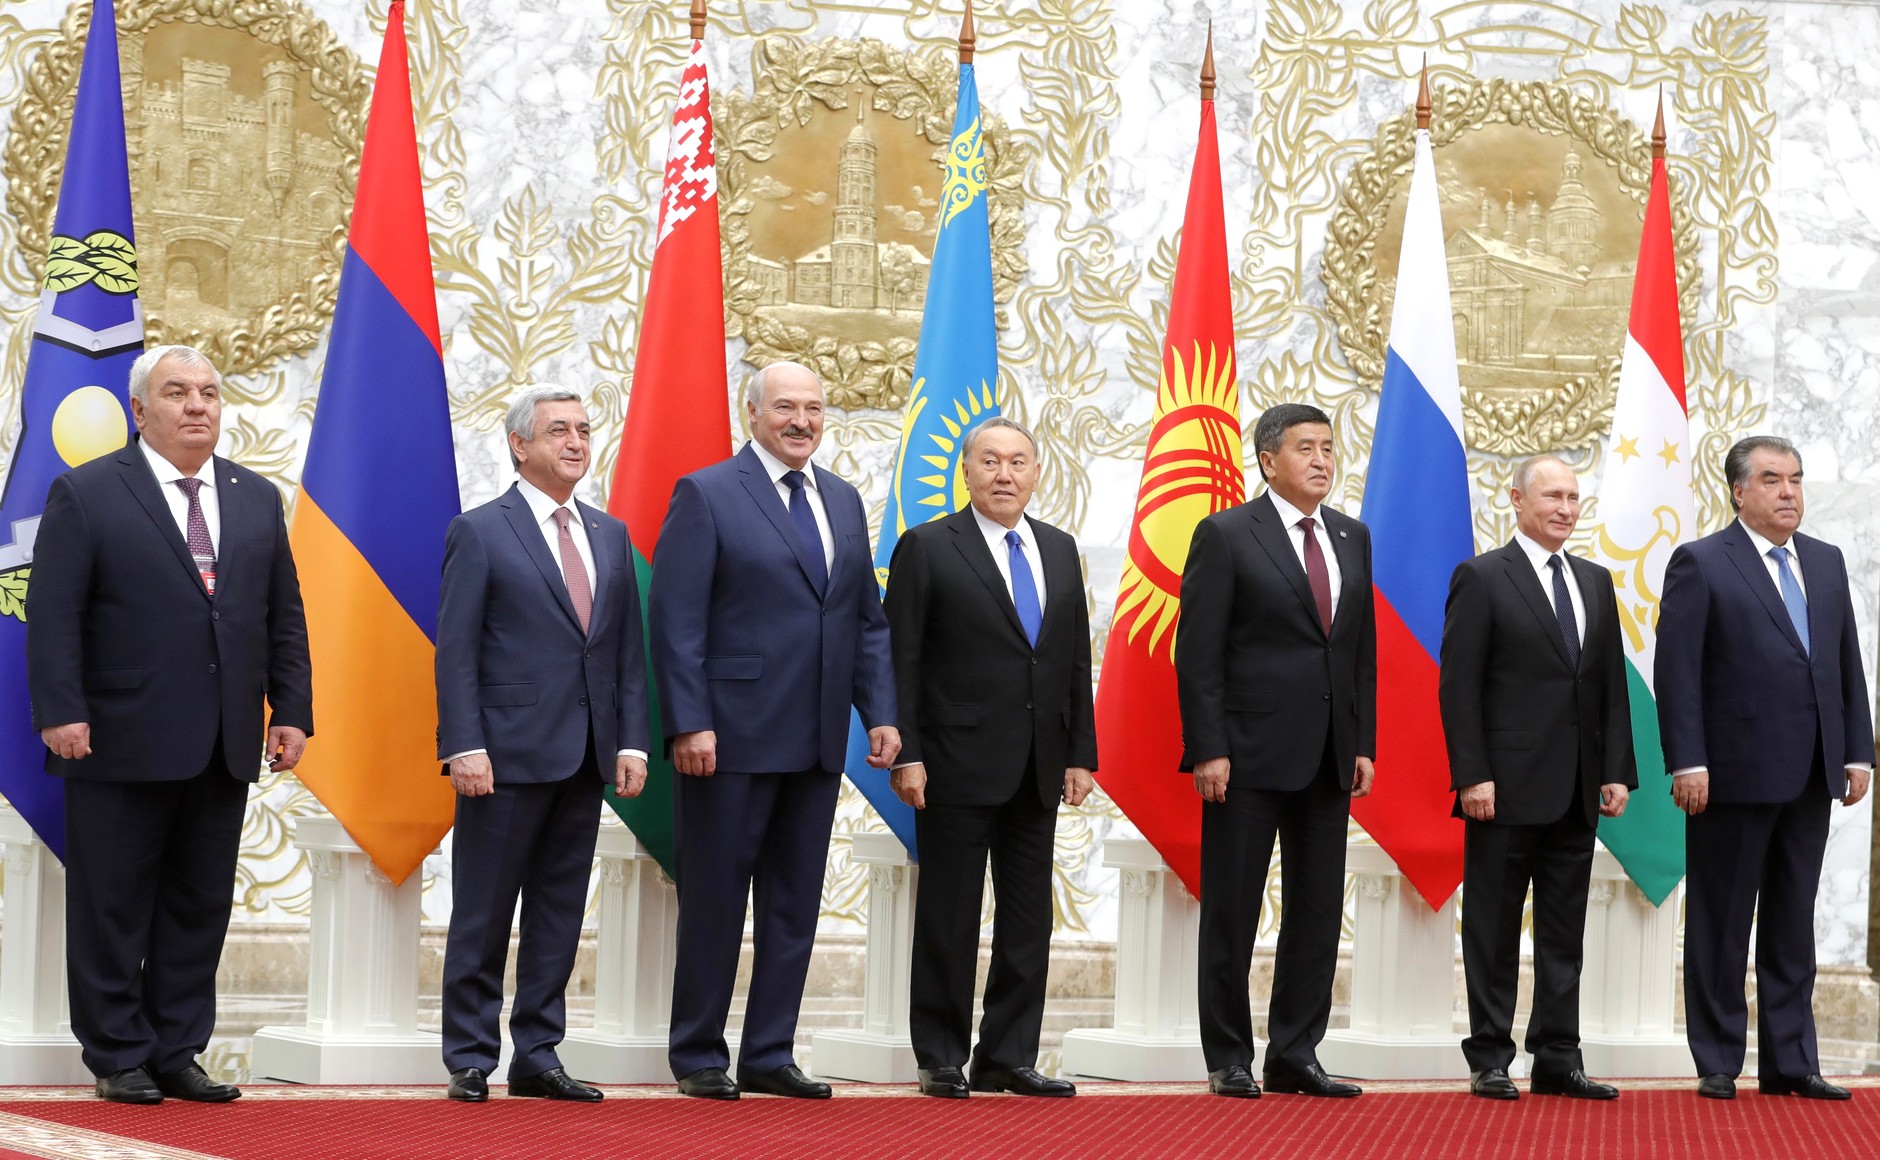 File:Participants in the CSTO Collective Security Council meeting.jpg -  Wikimedia Commons